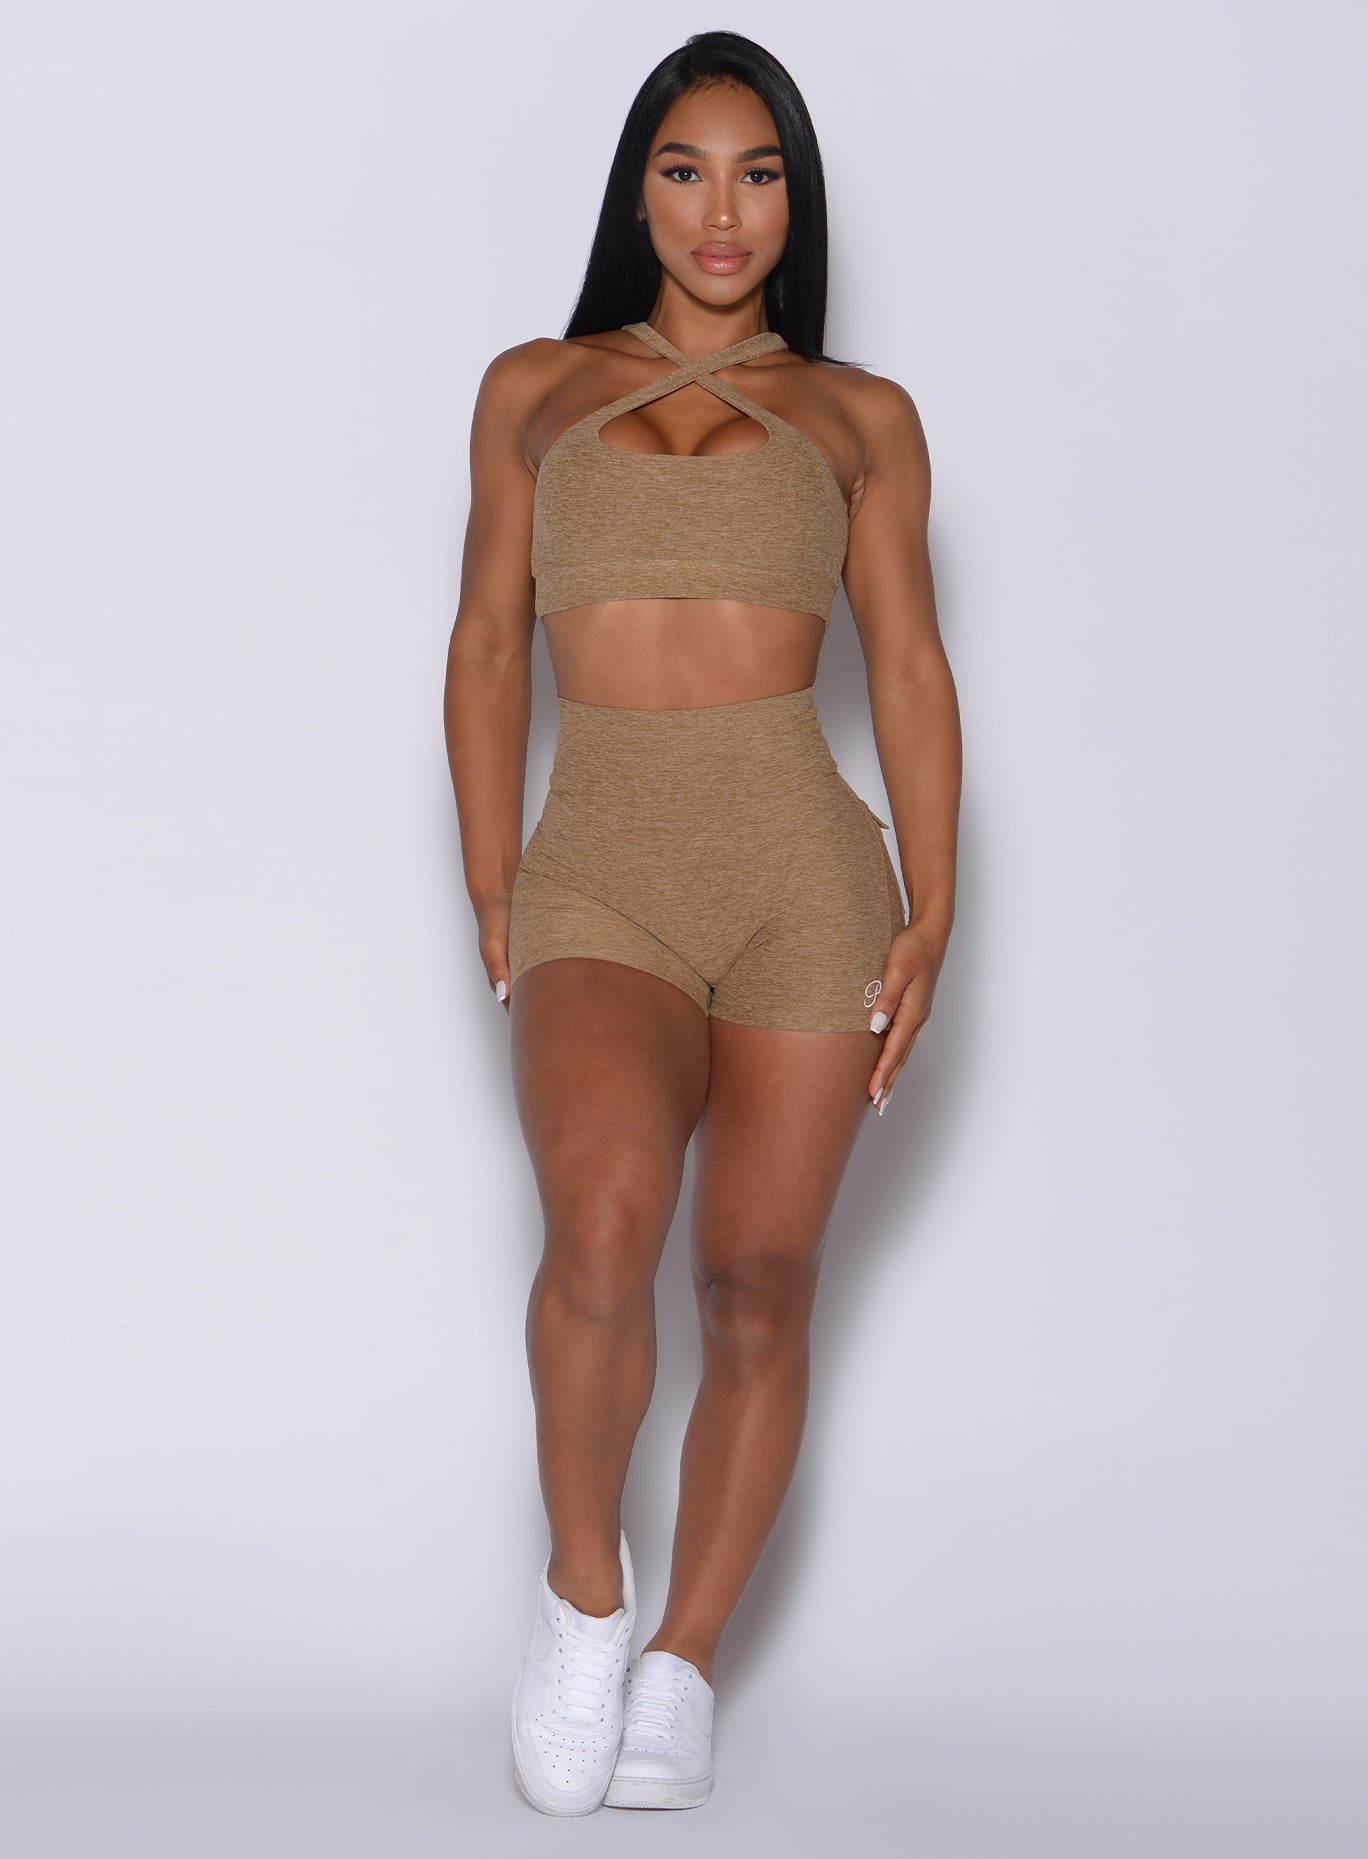 front profile view of a model wearing our Pocket Pop Shorts in caramel color and a matching 2 way sports bra